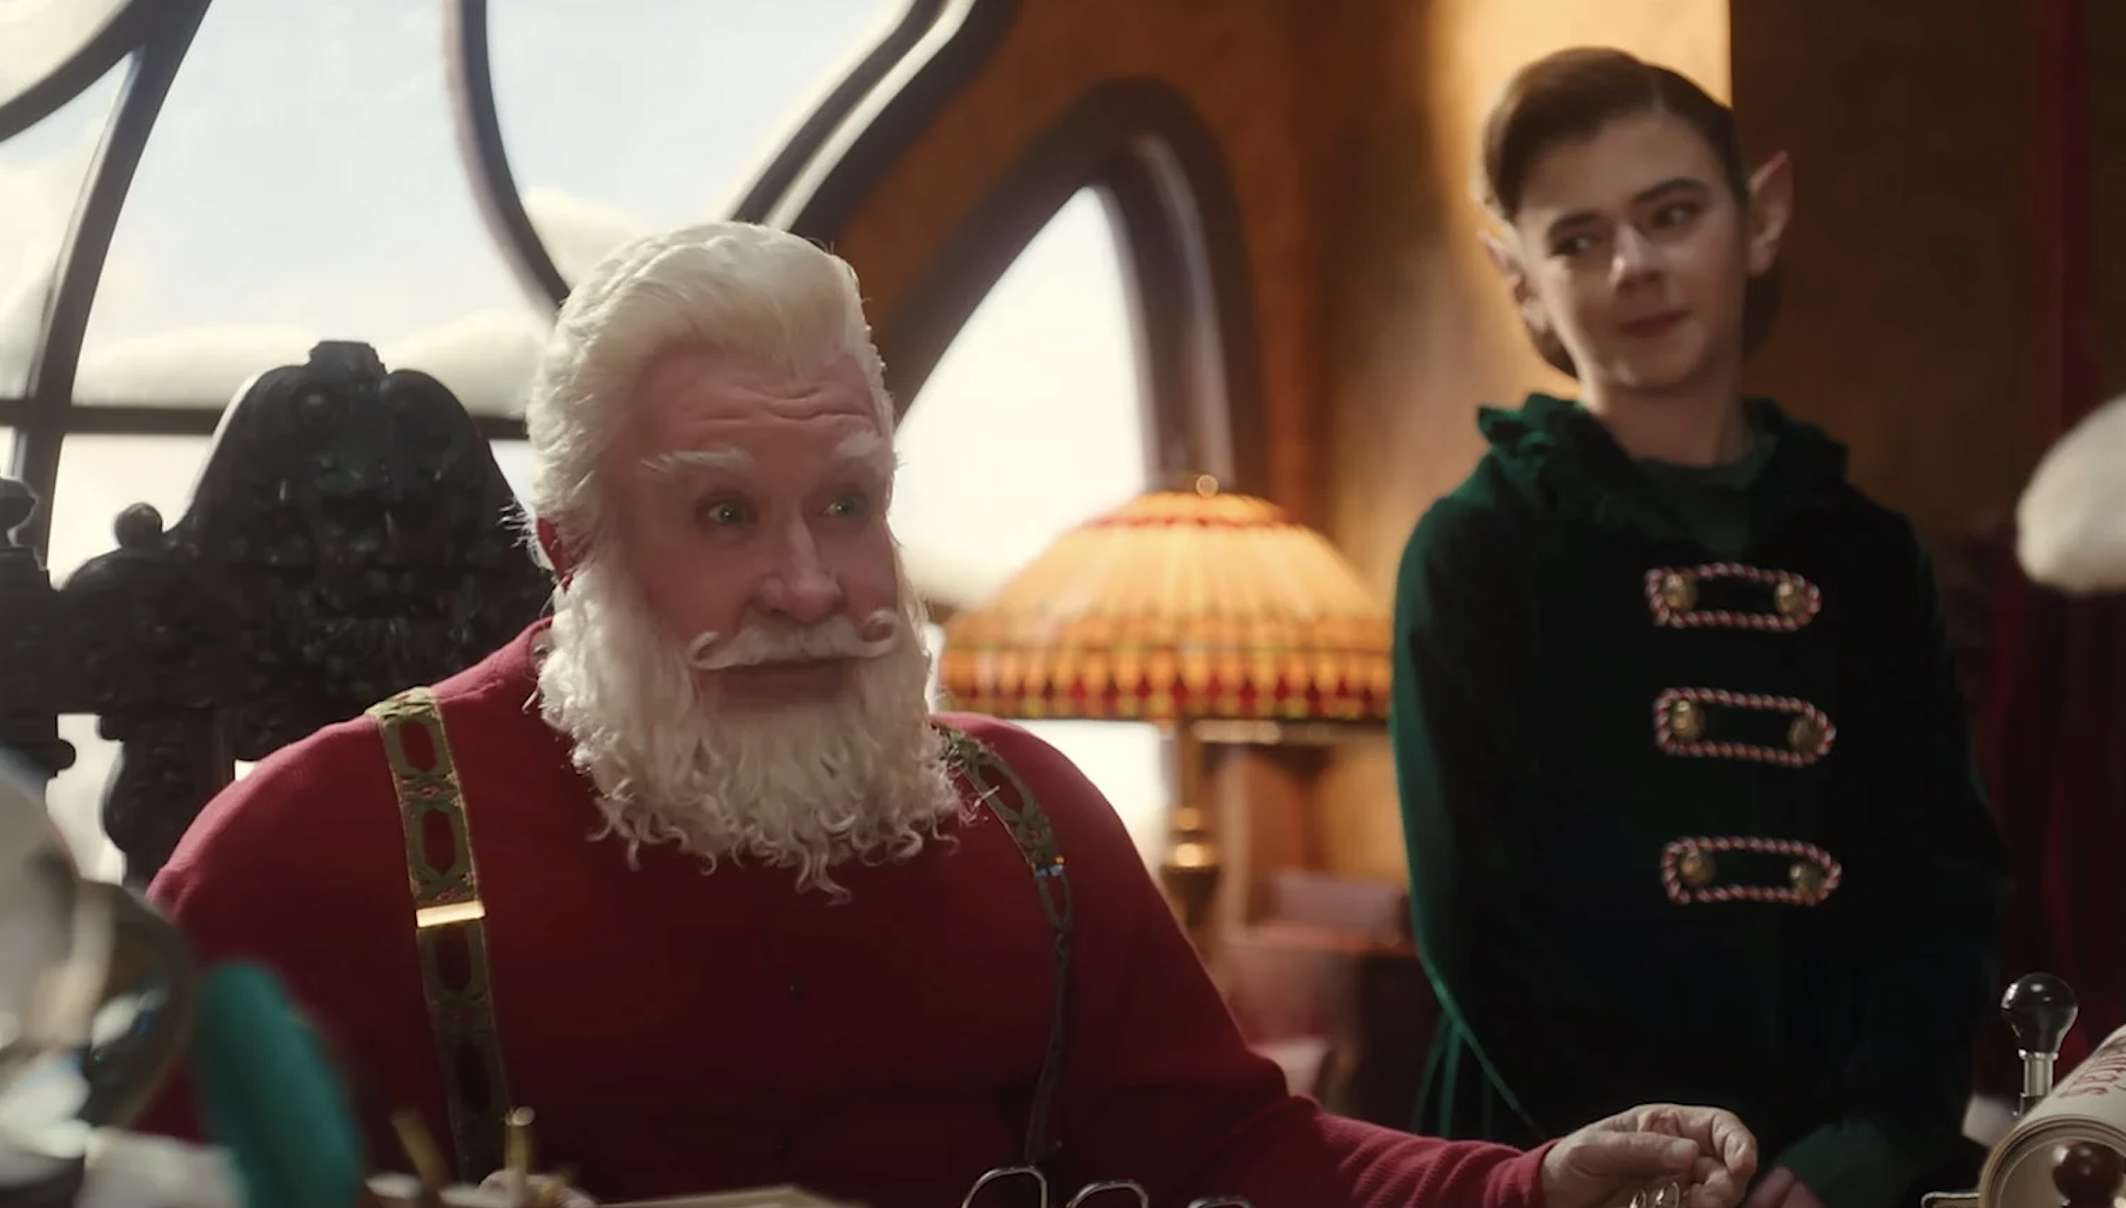 Santa and an elf by his side